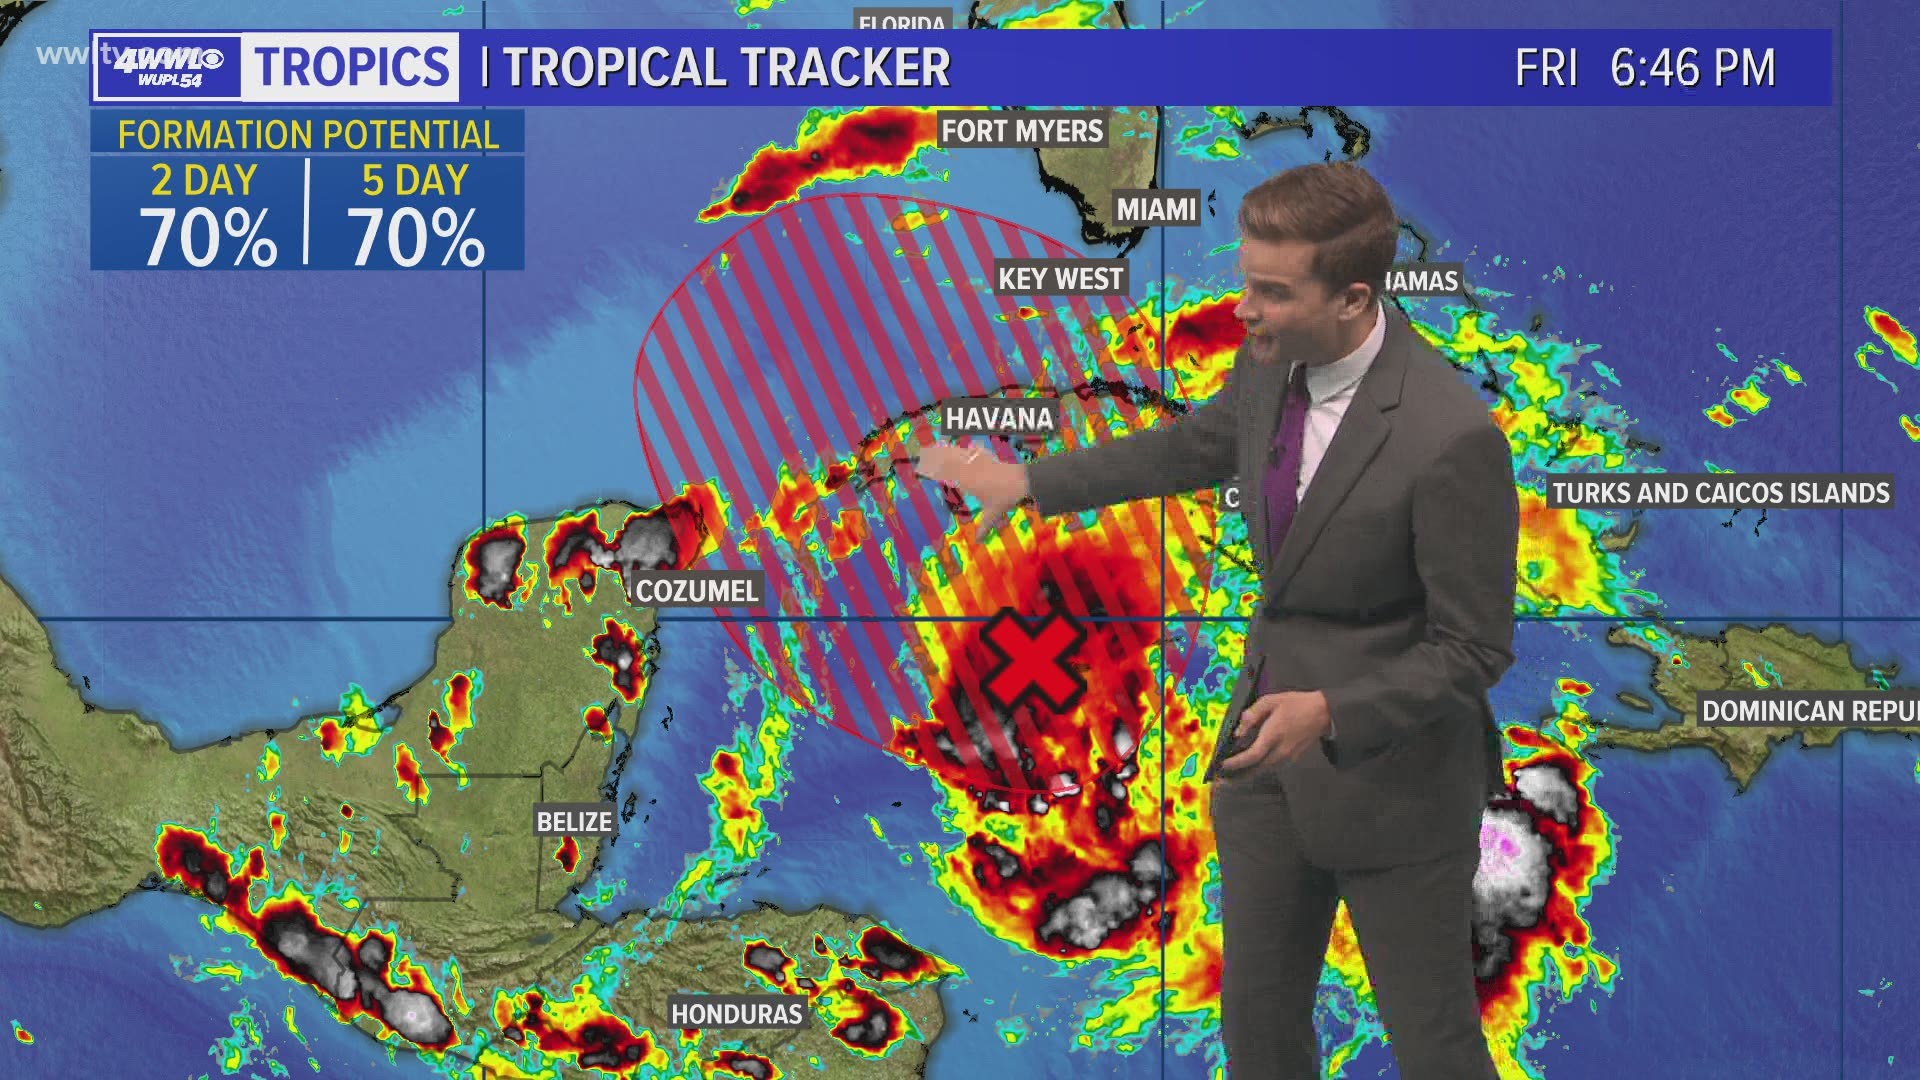 Invest 95L will likely become a tropical depression in the next few days and track into the Gulf of Mexico next week. Payton Malone has the details.